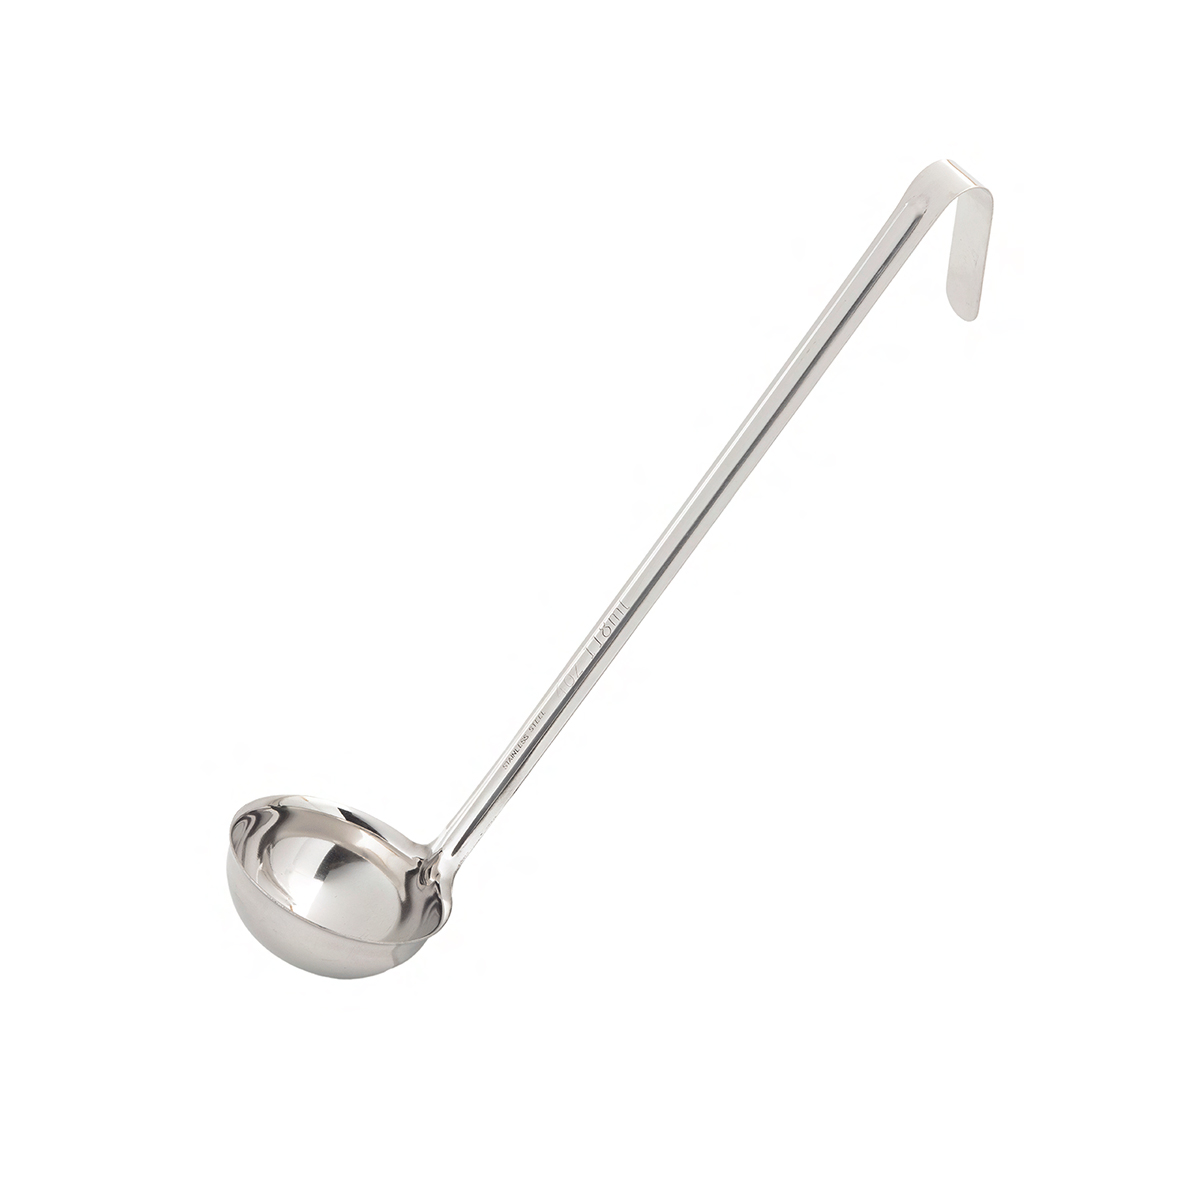 Alphin Pans Stainless Steel Ladle with Hanging Hook - Various Sizes